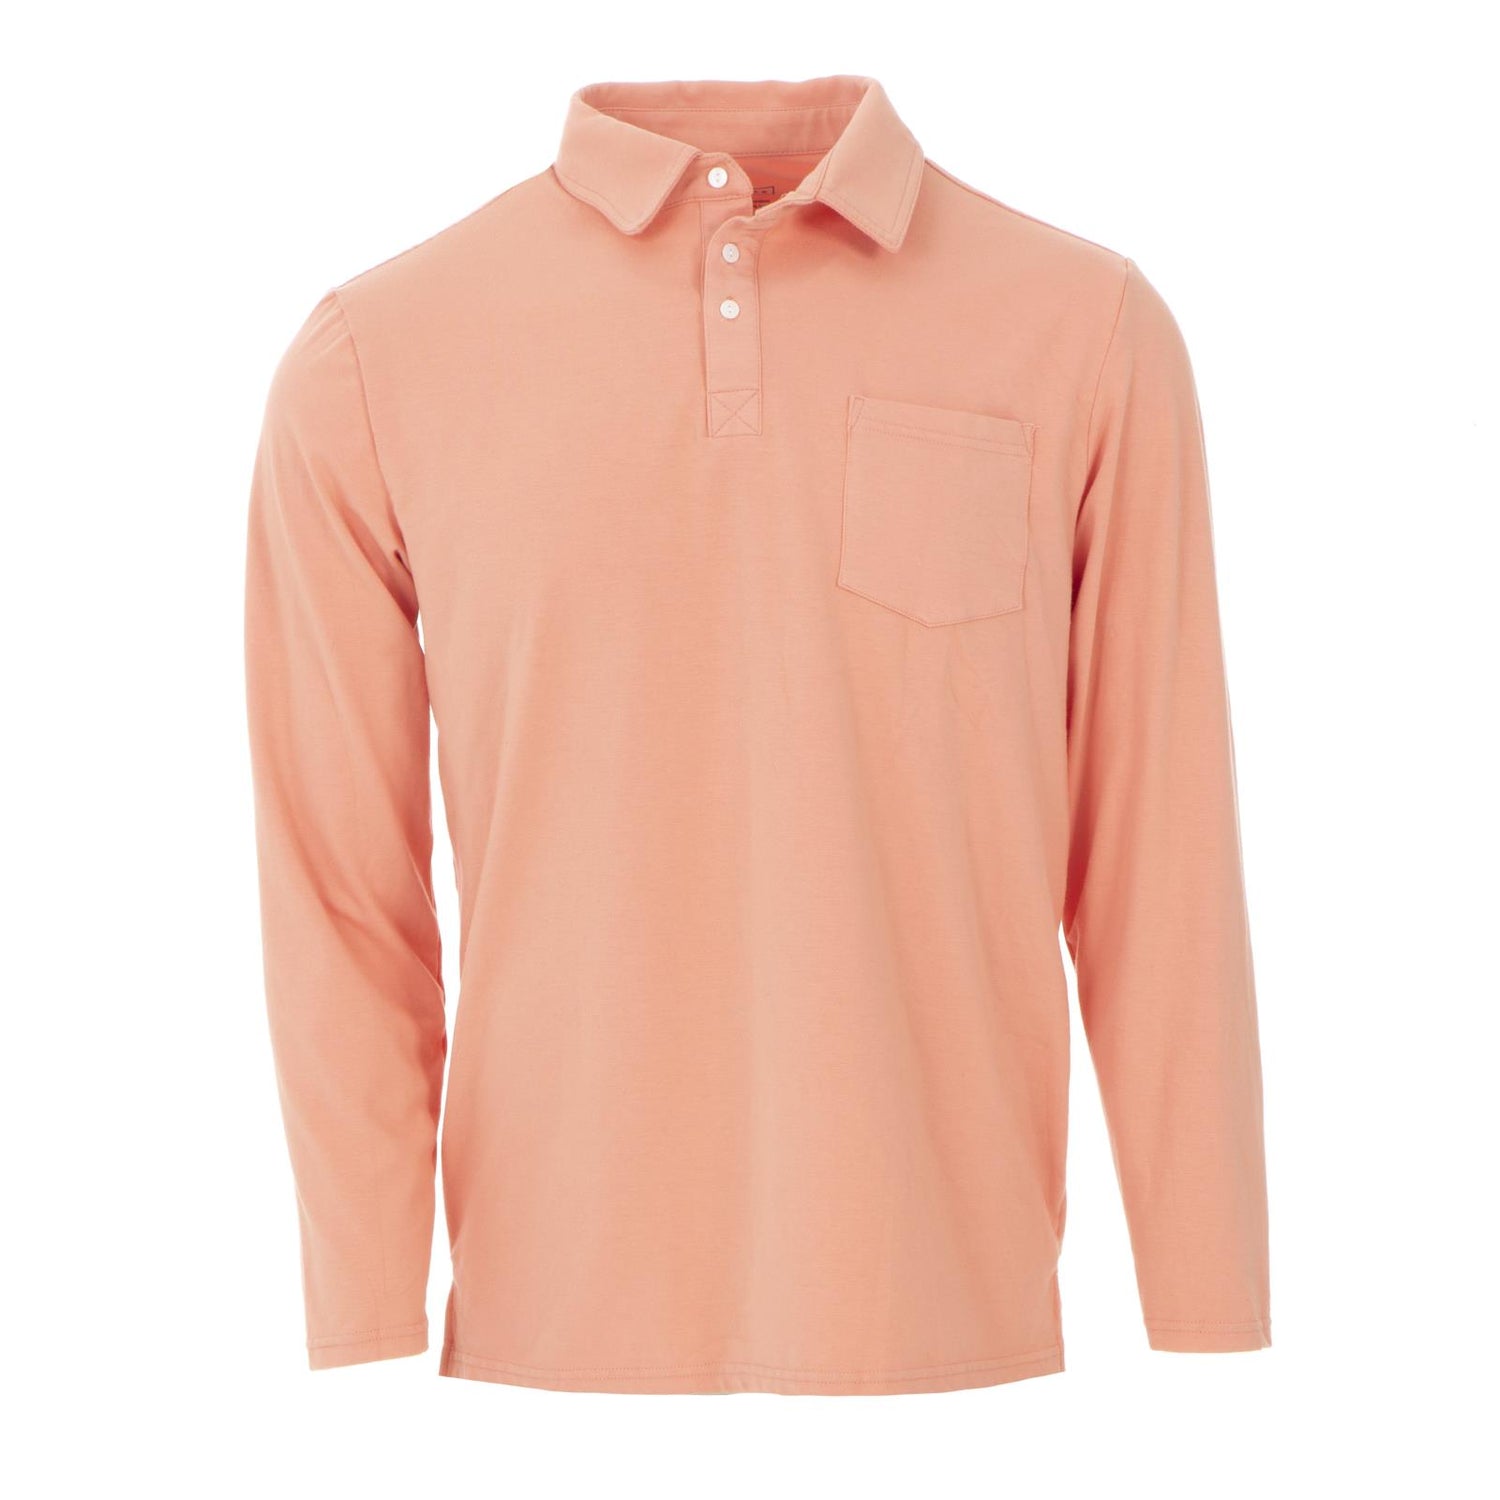 Men's Long Sleeve Luxe Jersey Polo in Blush